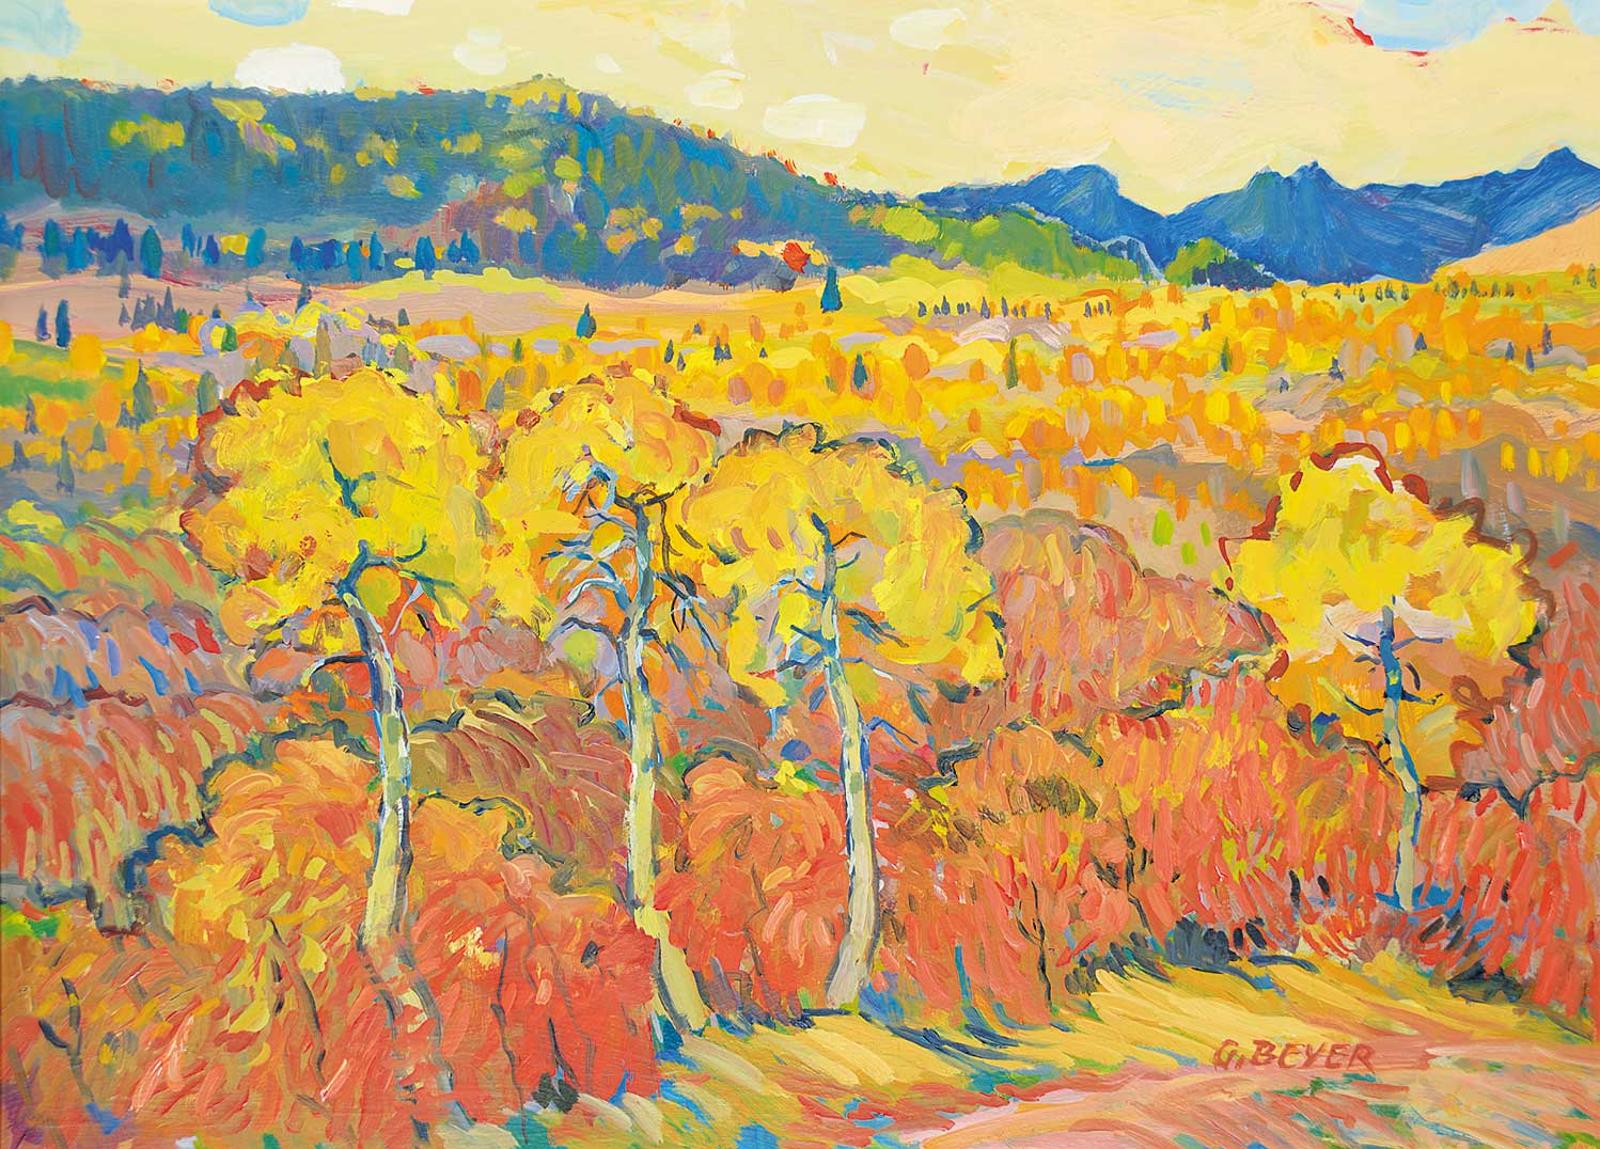 Gerhard Beyer - Untitled - Fall in the Foothills